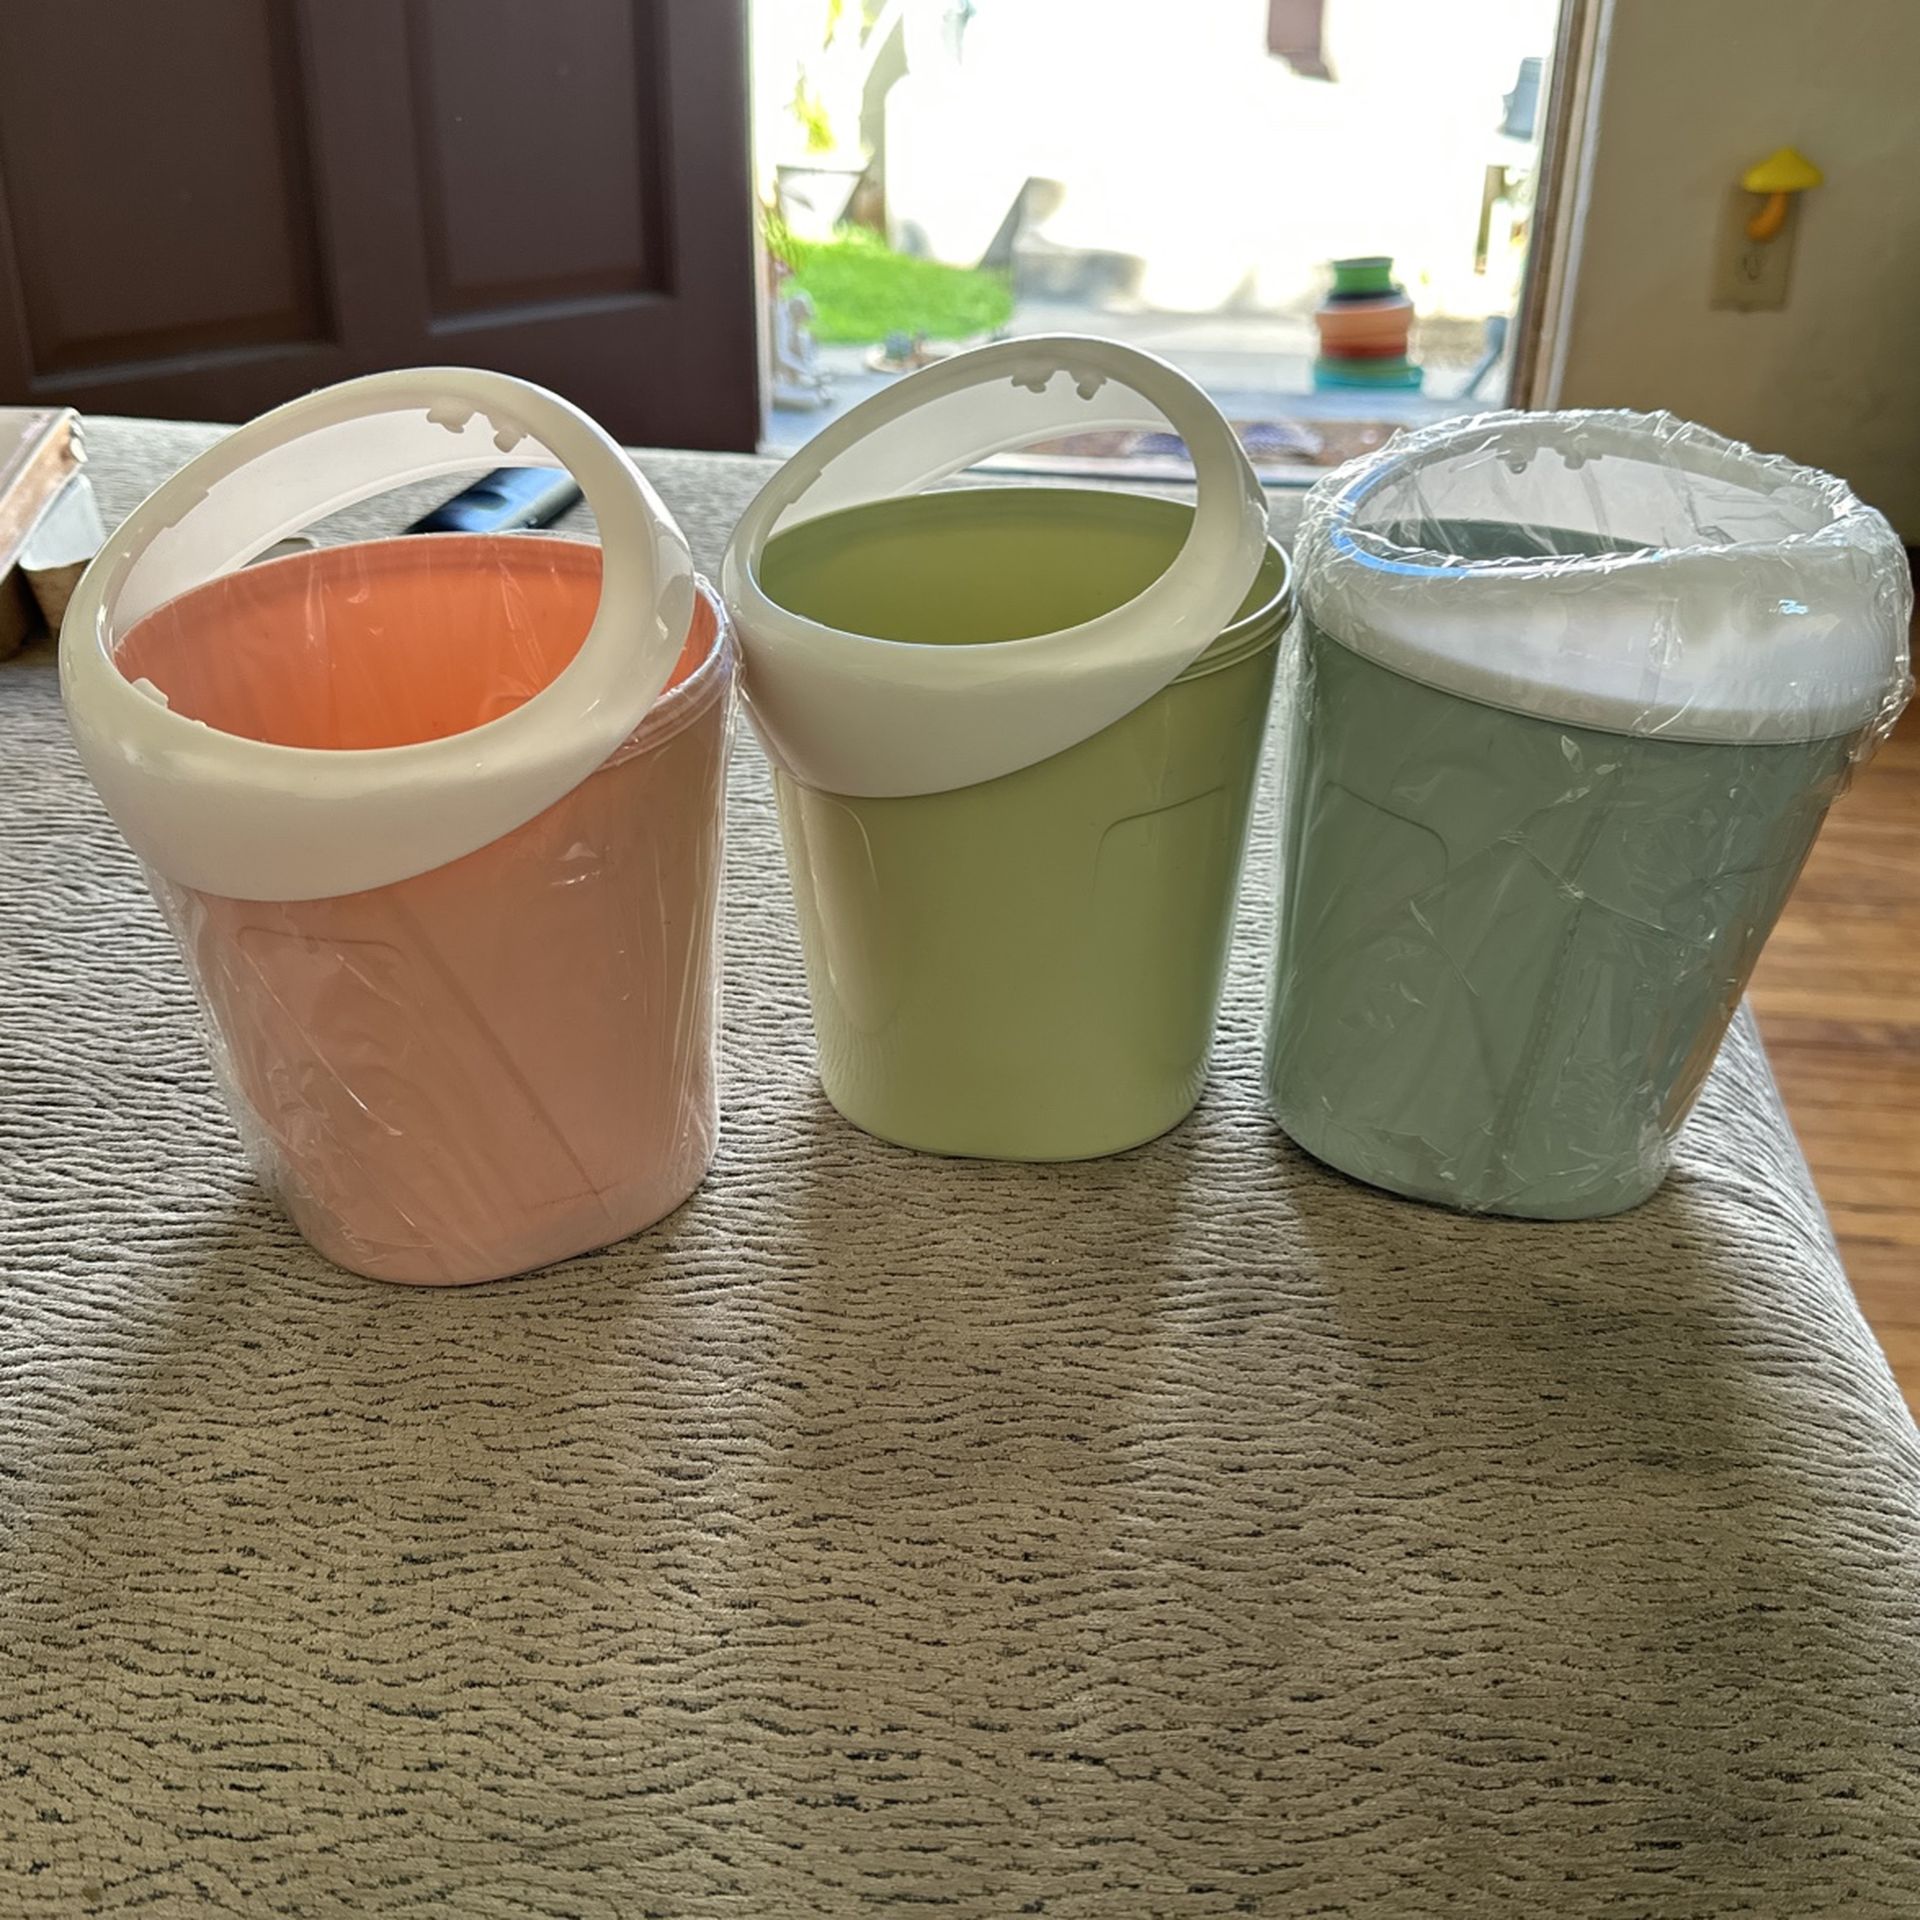 set of 3 mini trashcans pink green and blue 